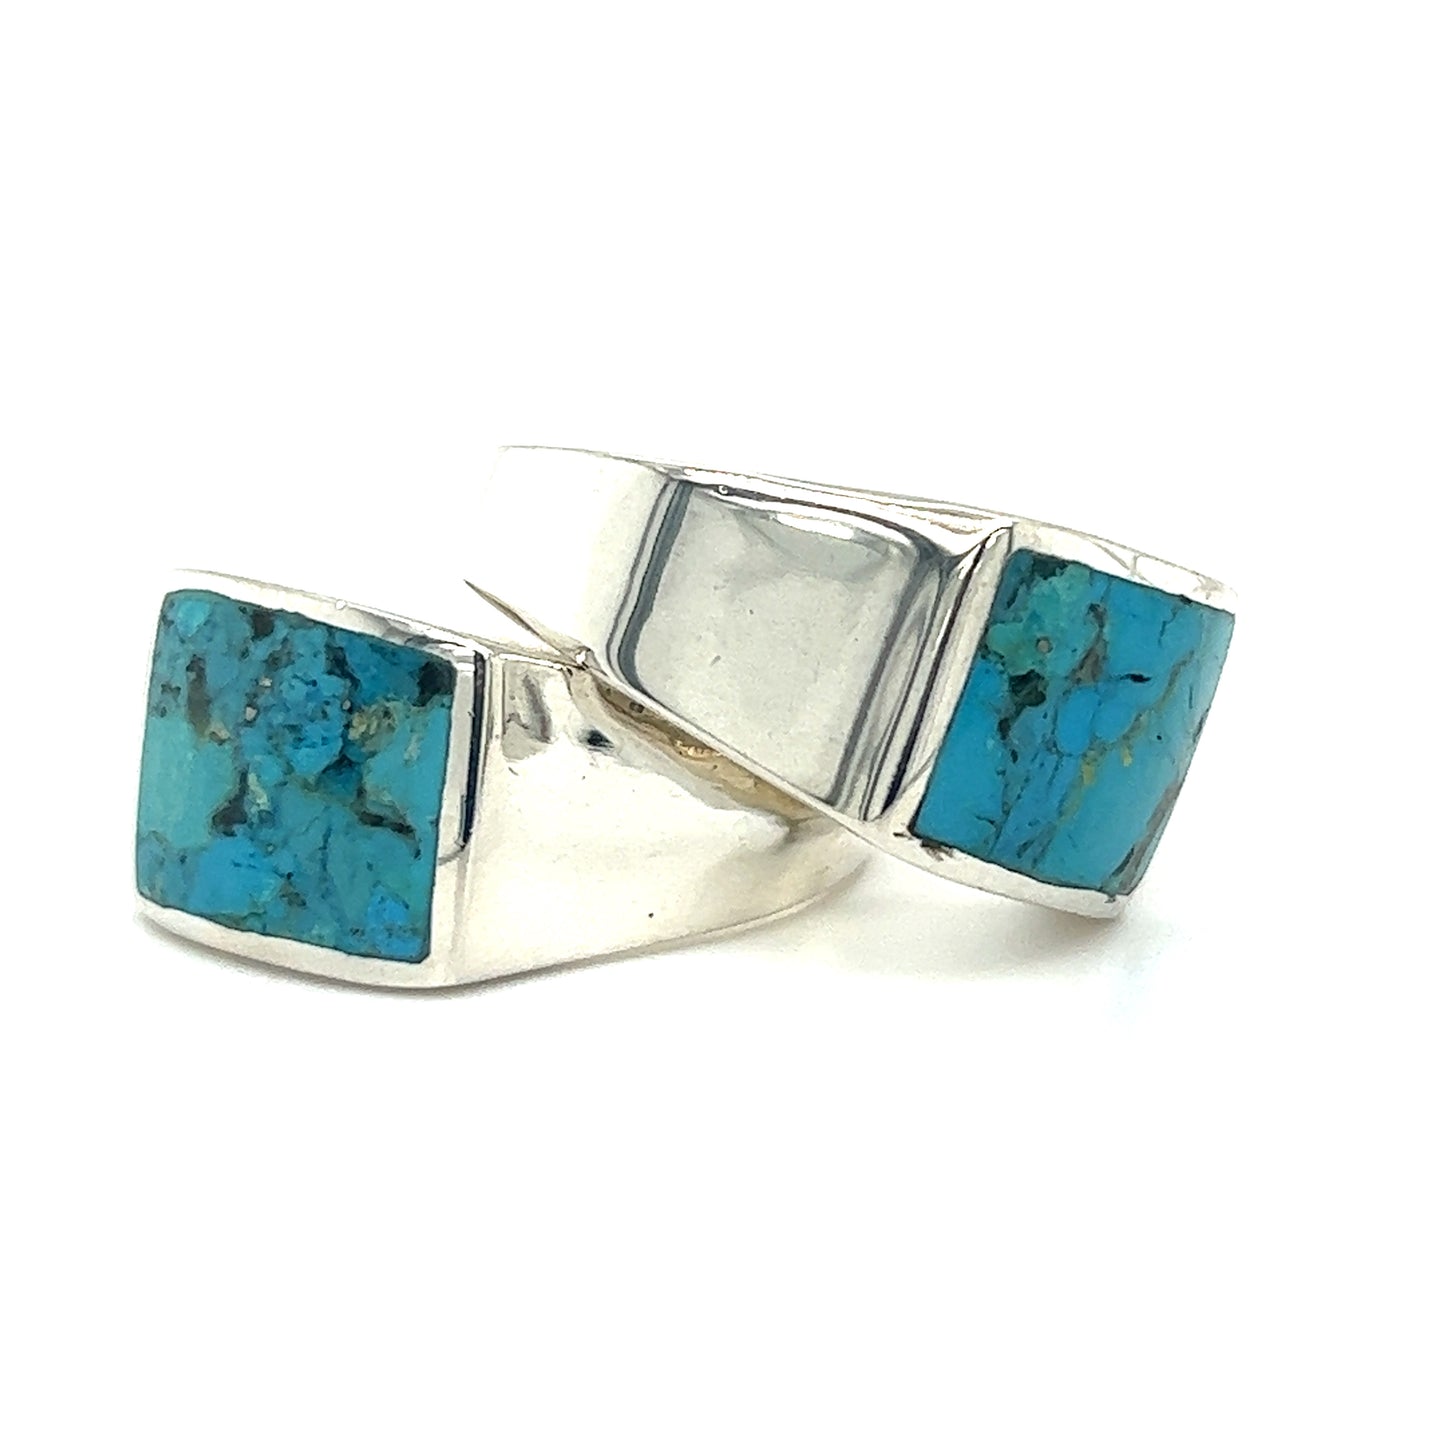 A pair of Super Silver Kingman Turquoise Signet Rings.